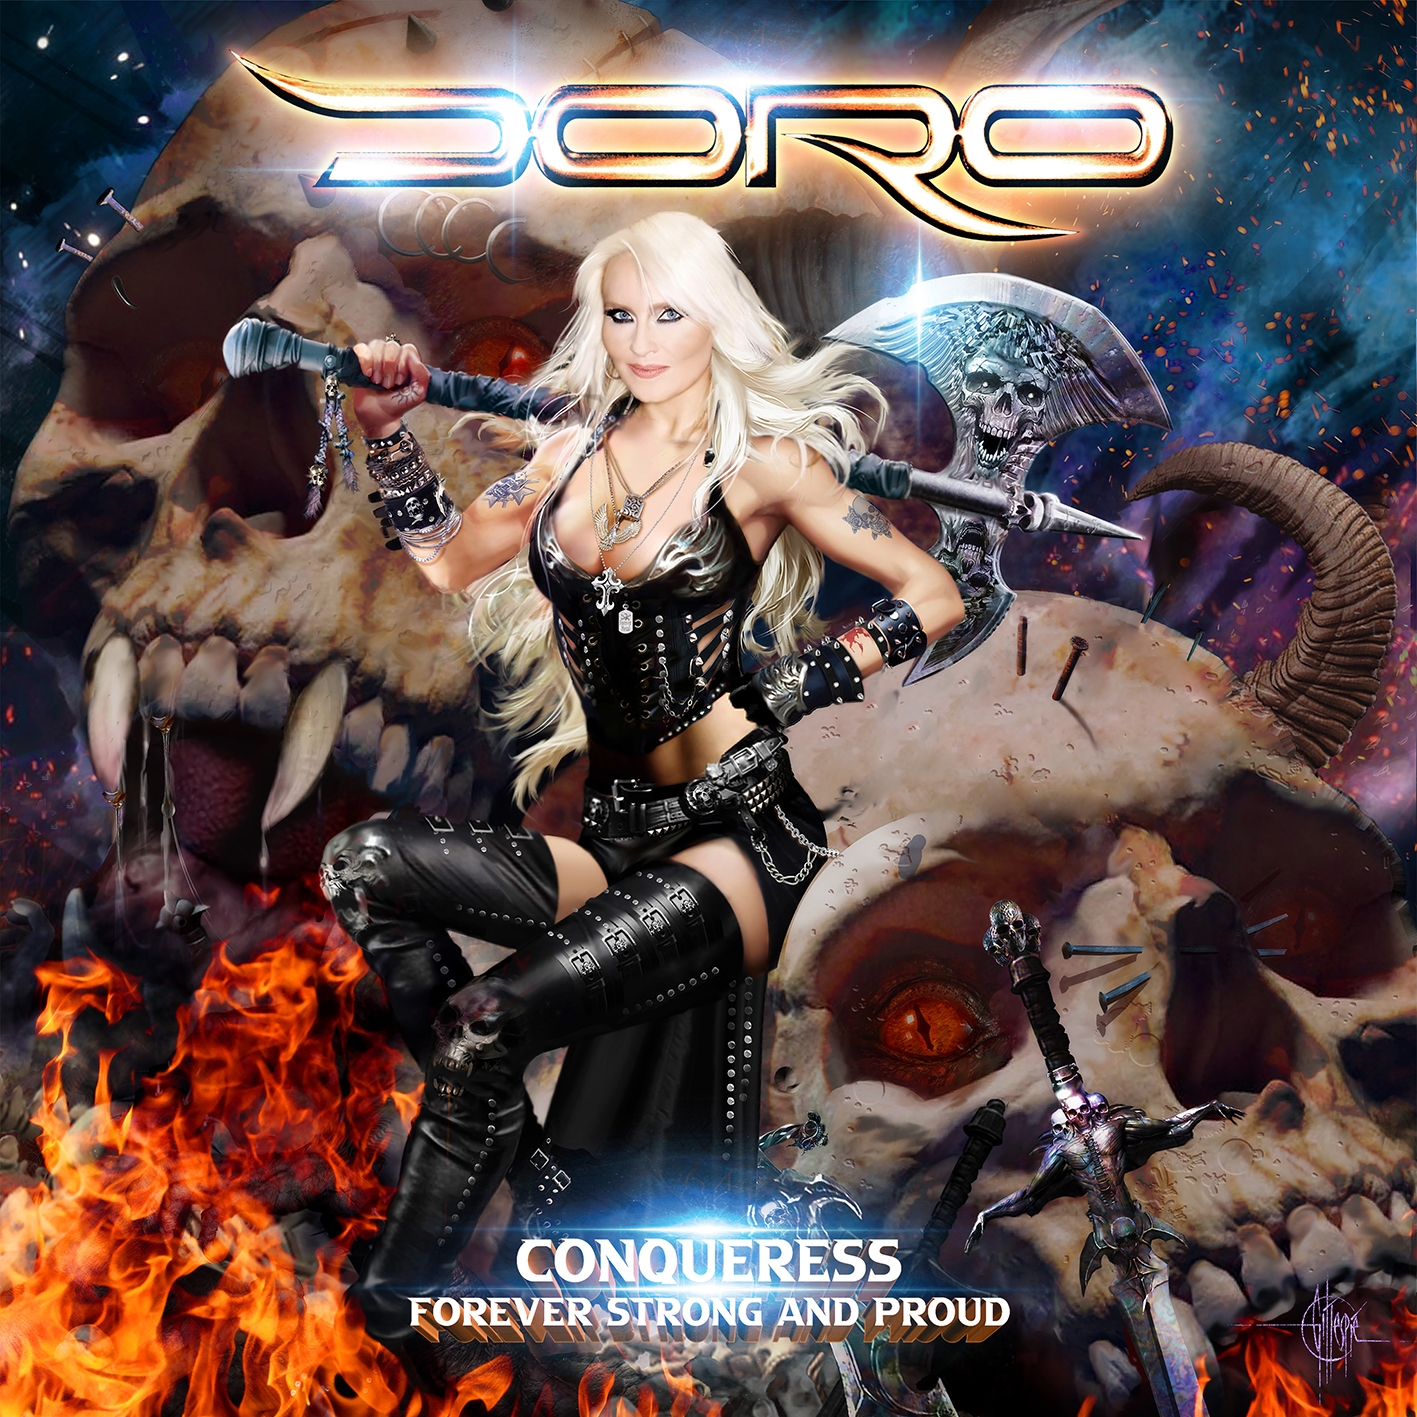 doro_conqueress_forever_strong_and_proud_artwork.jpg